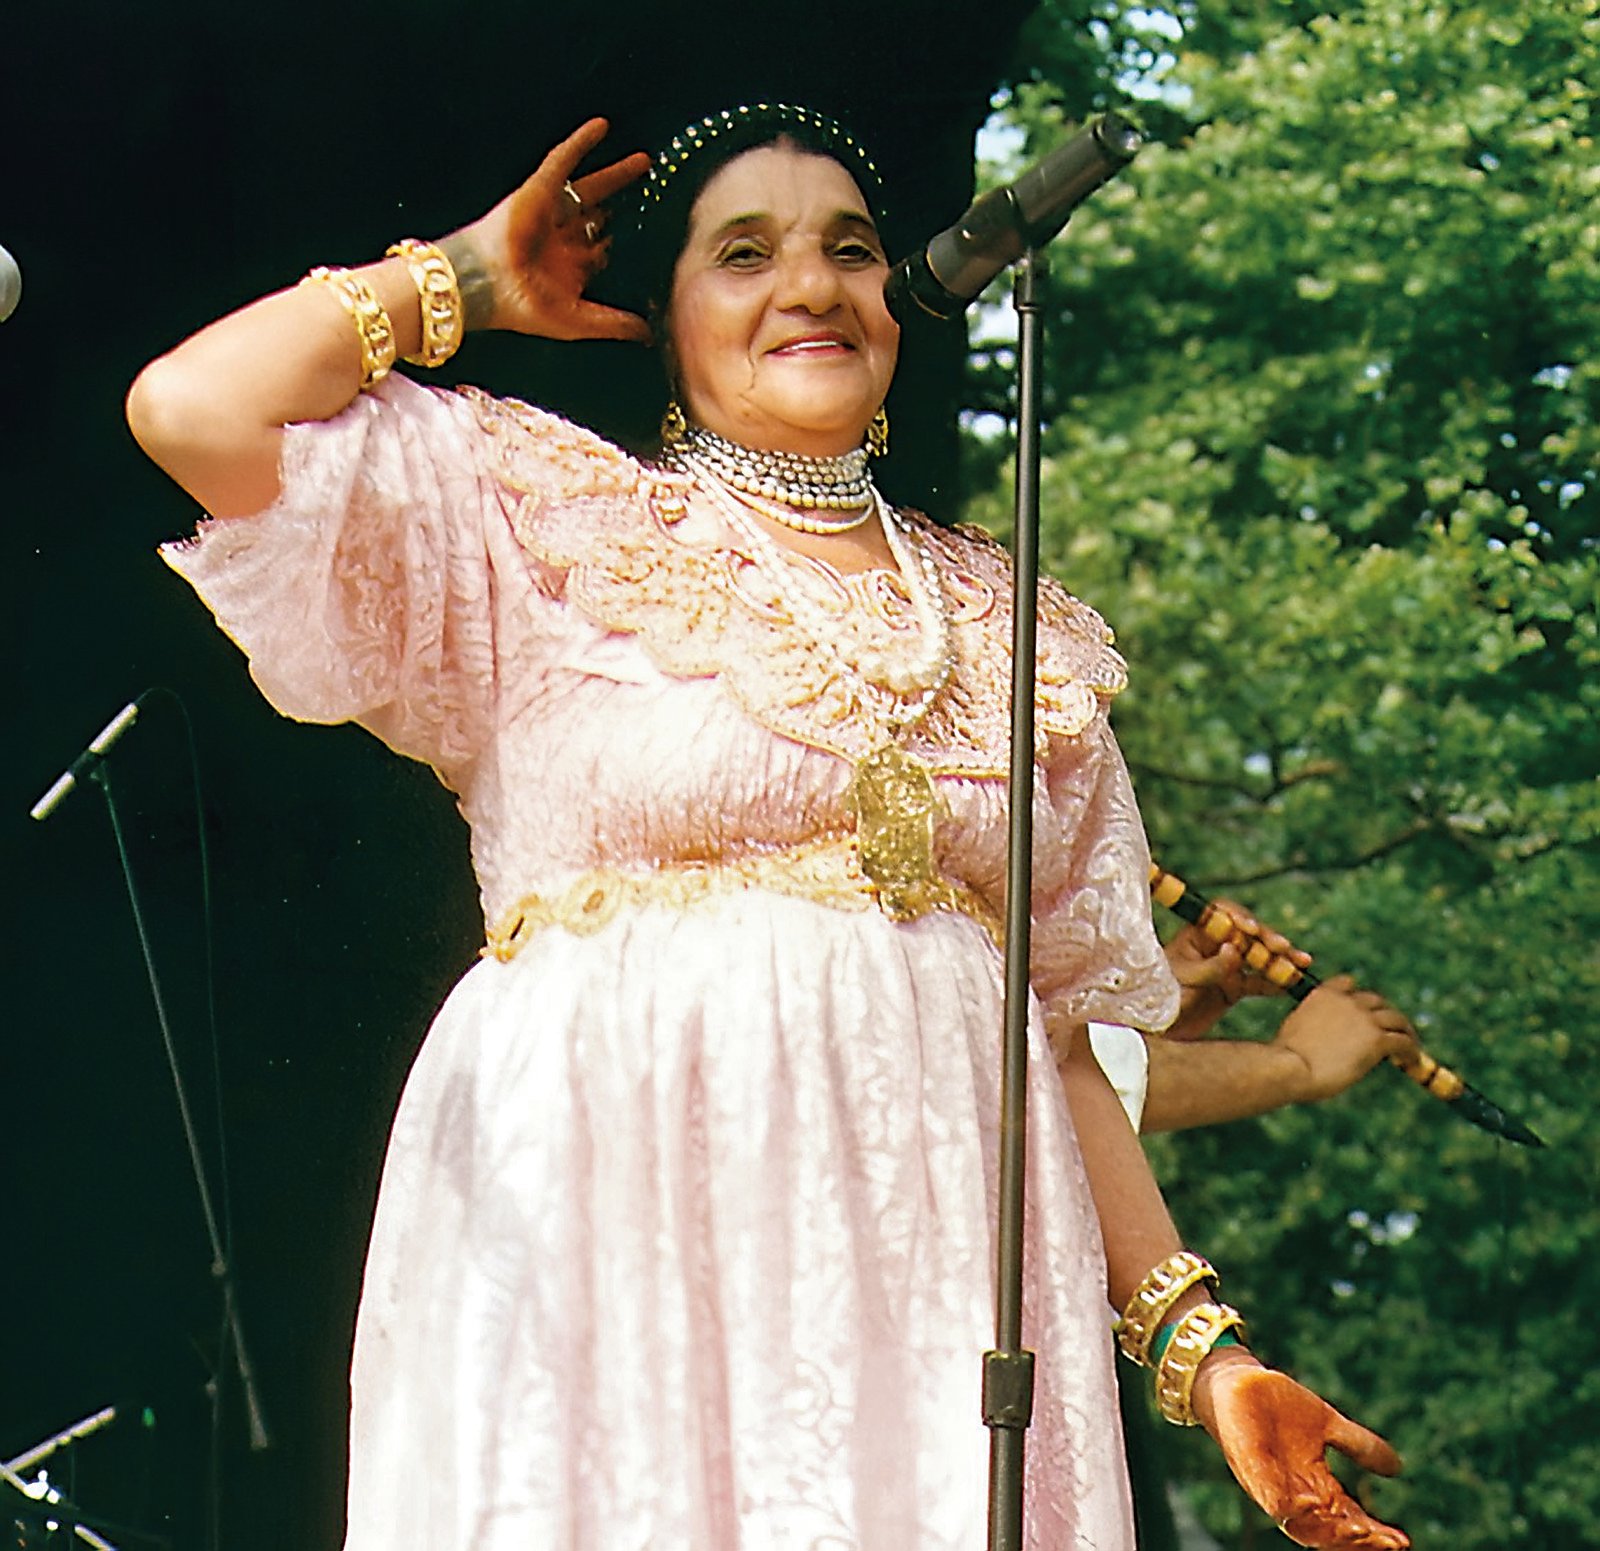 As her fame grew internationally, Remitti continued to perform wearing traditional Bedouin Algerian dresses, glittering gold shoes, gold jewelry and henna on both palms. By the early 2000s, she was well-known in Europe, and her first performance in the US came in the summer of 2002, where she appeared on an outdoor stage in New York’s Central Park. 